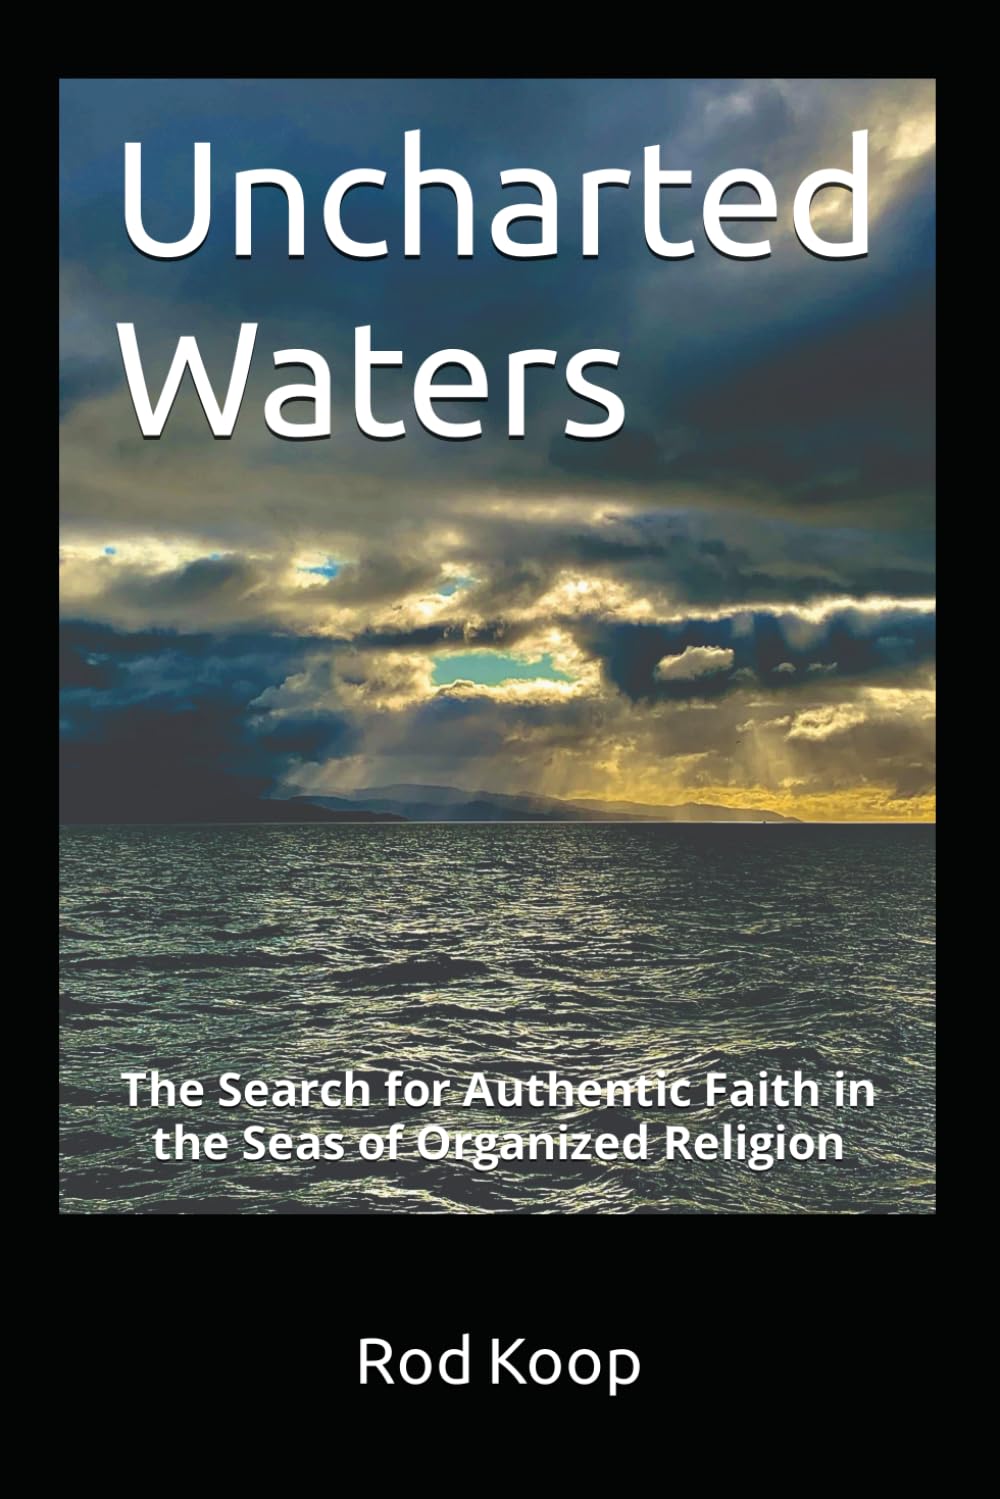 Uncharted Waters: The Search for Authentic Faith in the Seas of Organized Religion